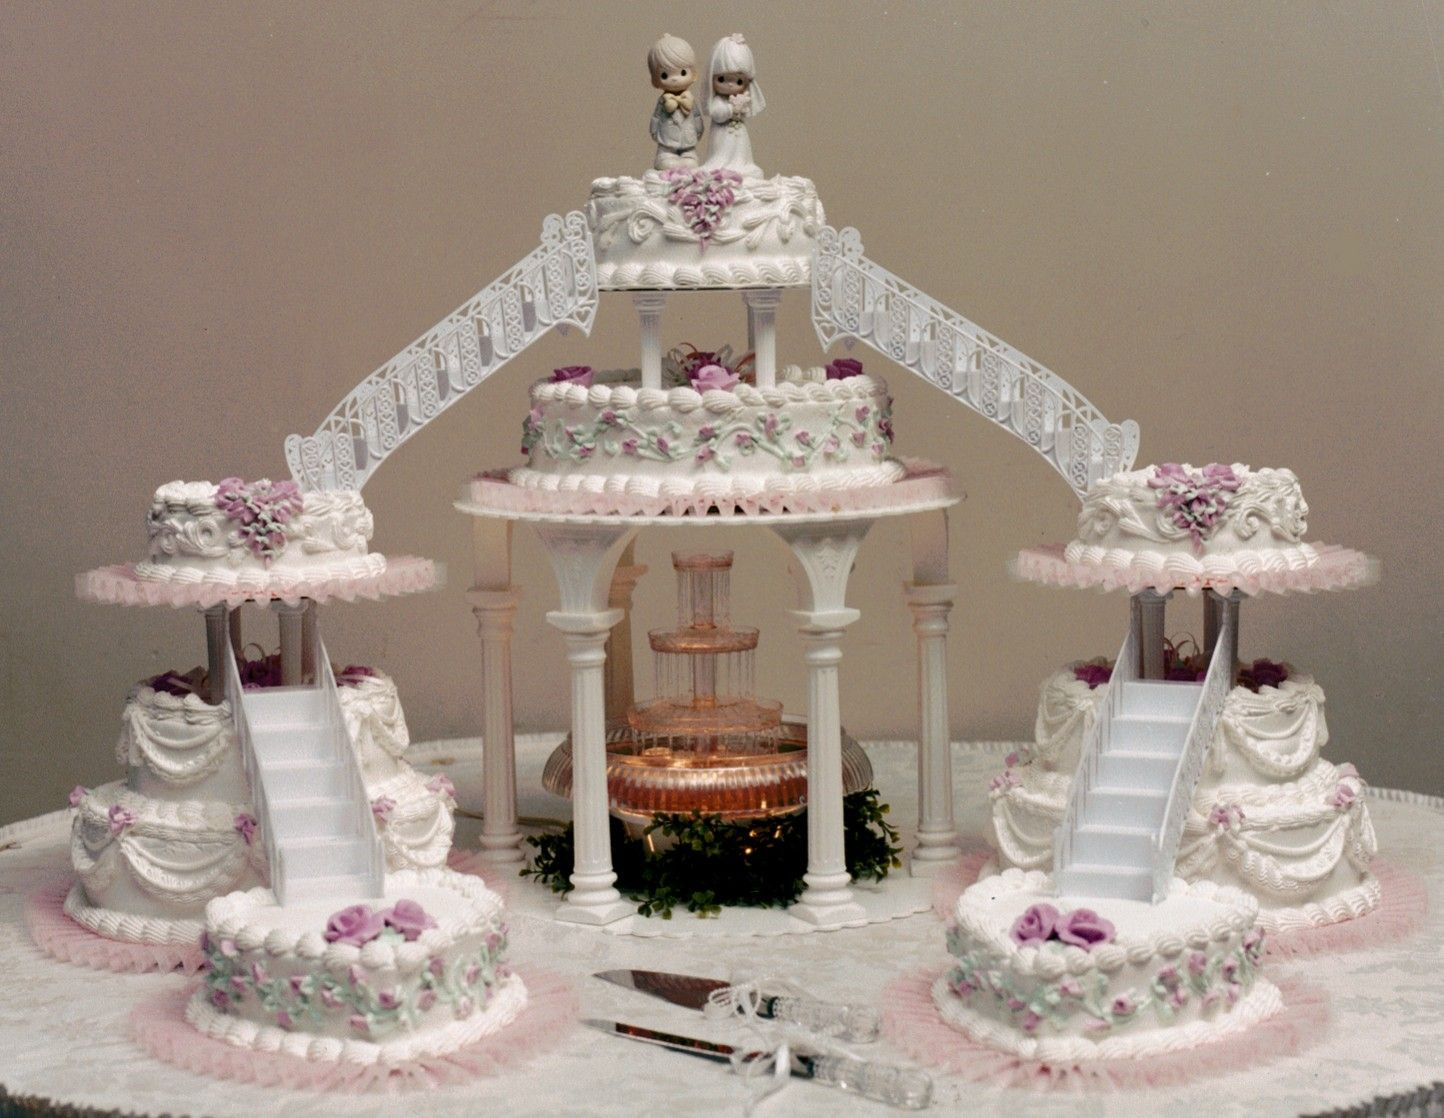 Wedding Cakes With Fountains And Bridges
 mc arthurs bakery wedding cake with fountains and bridges